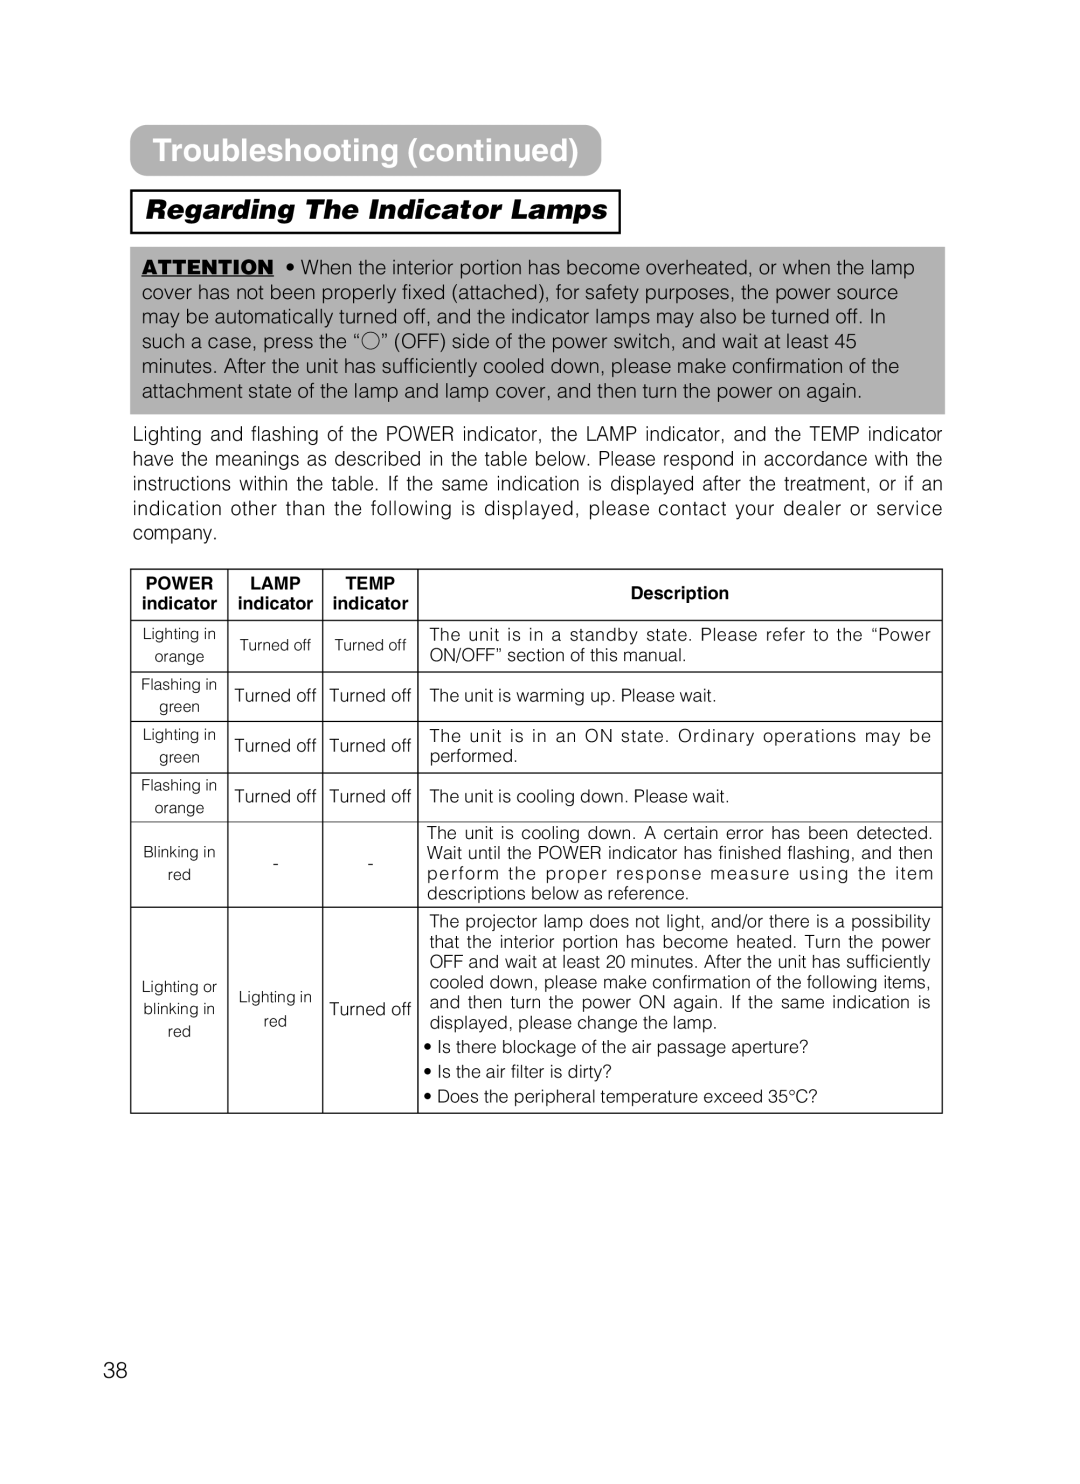 Hitachi HOME-1 user manual Regarding The Indicator Lamps, Troubleshooting continued 